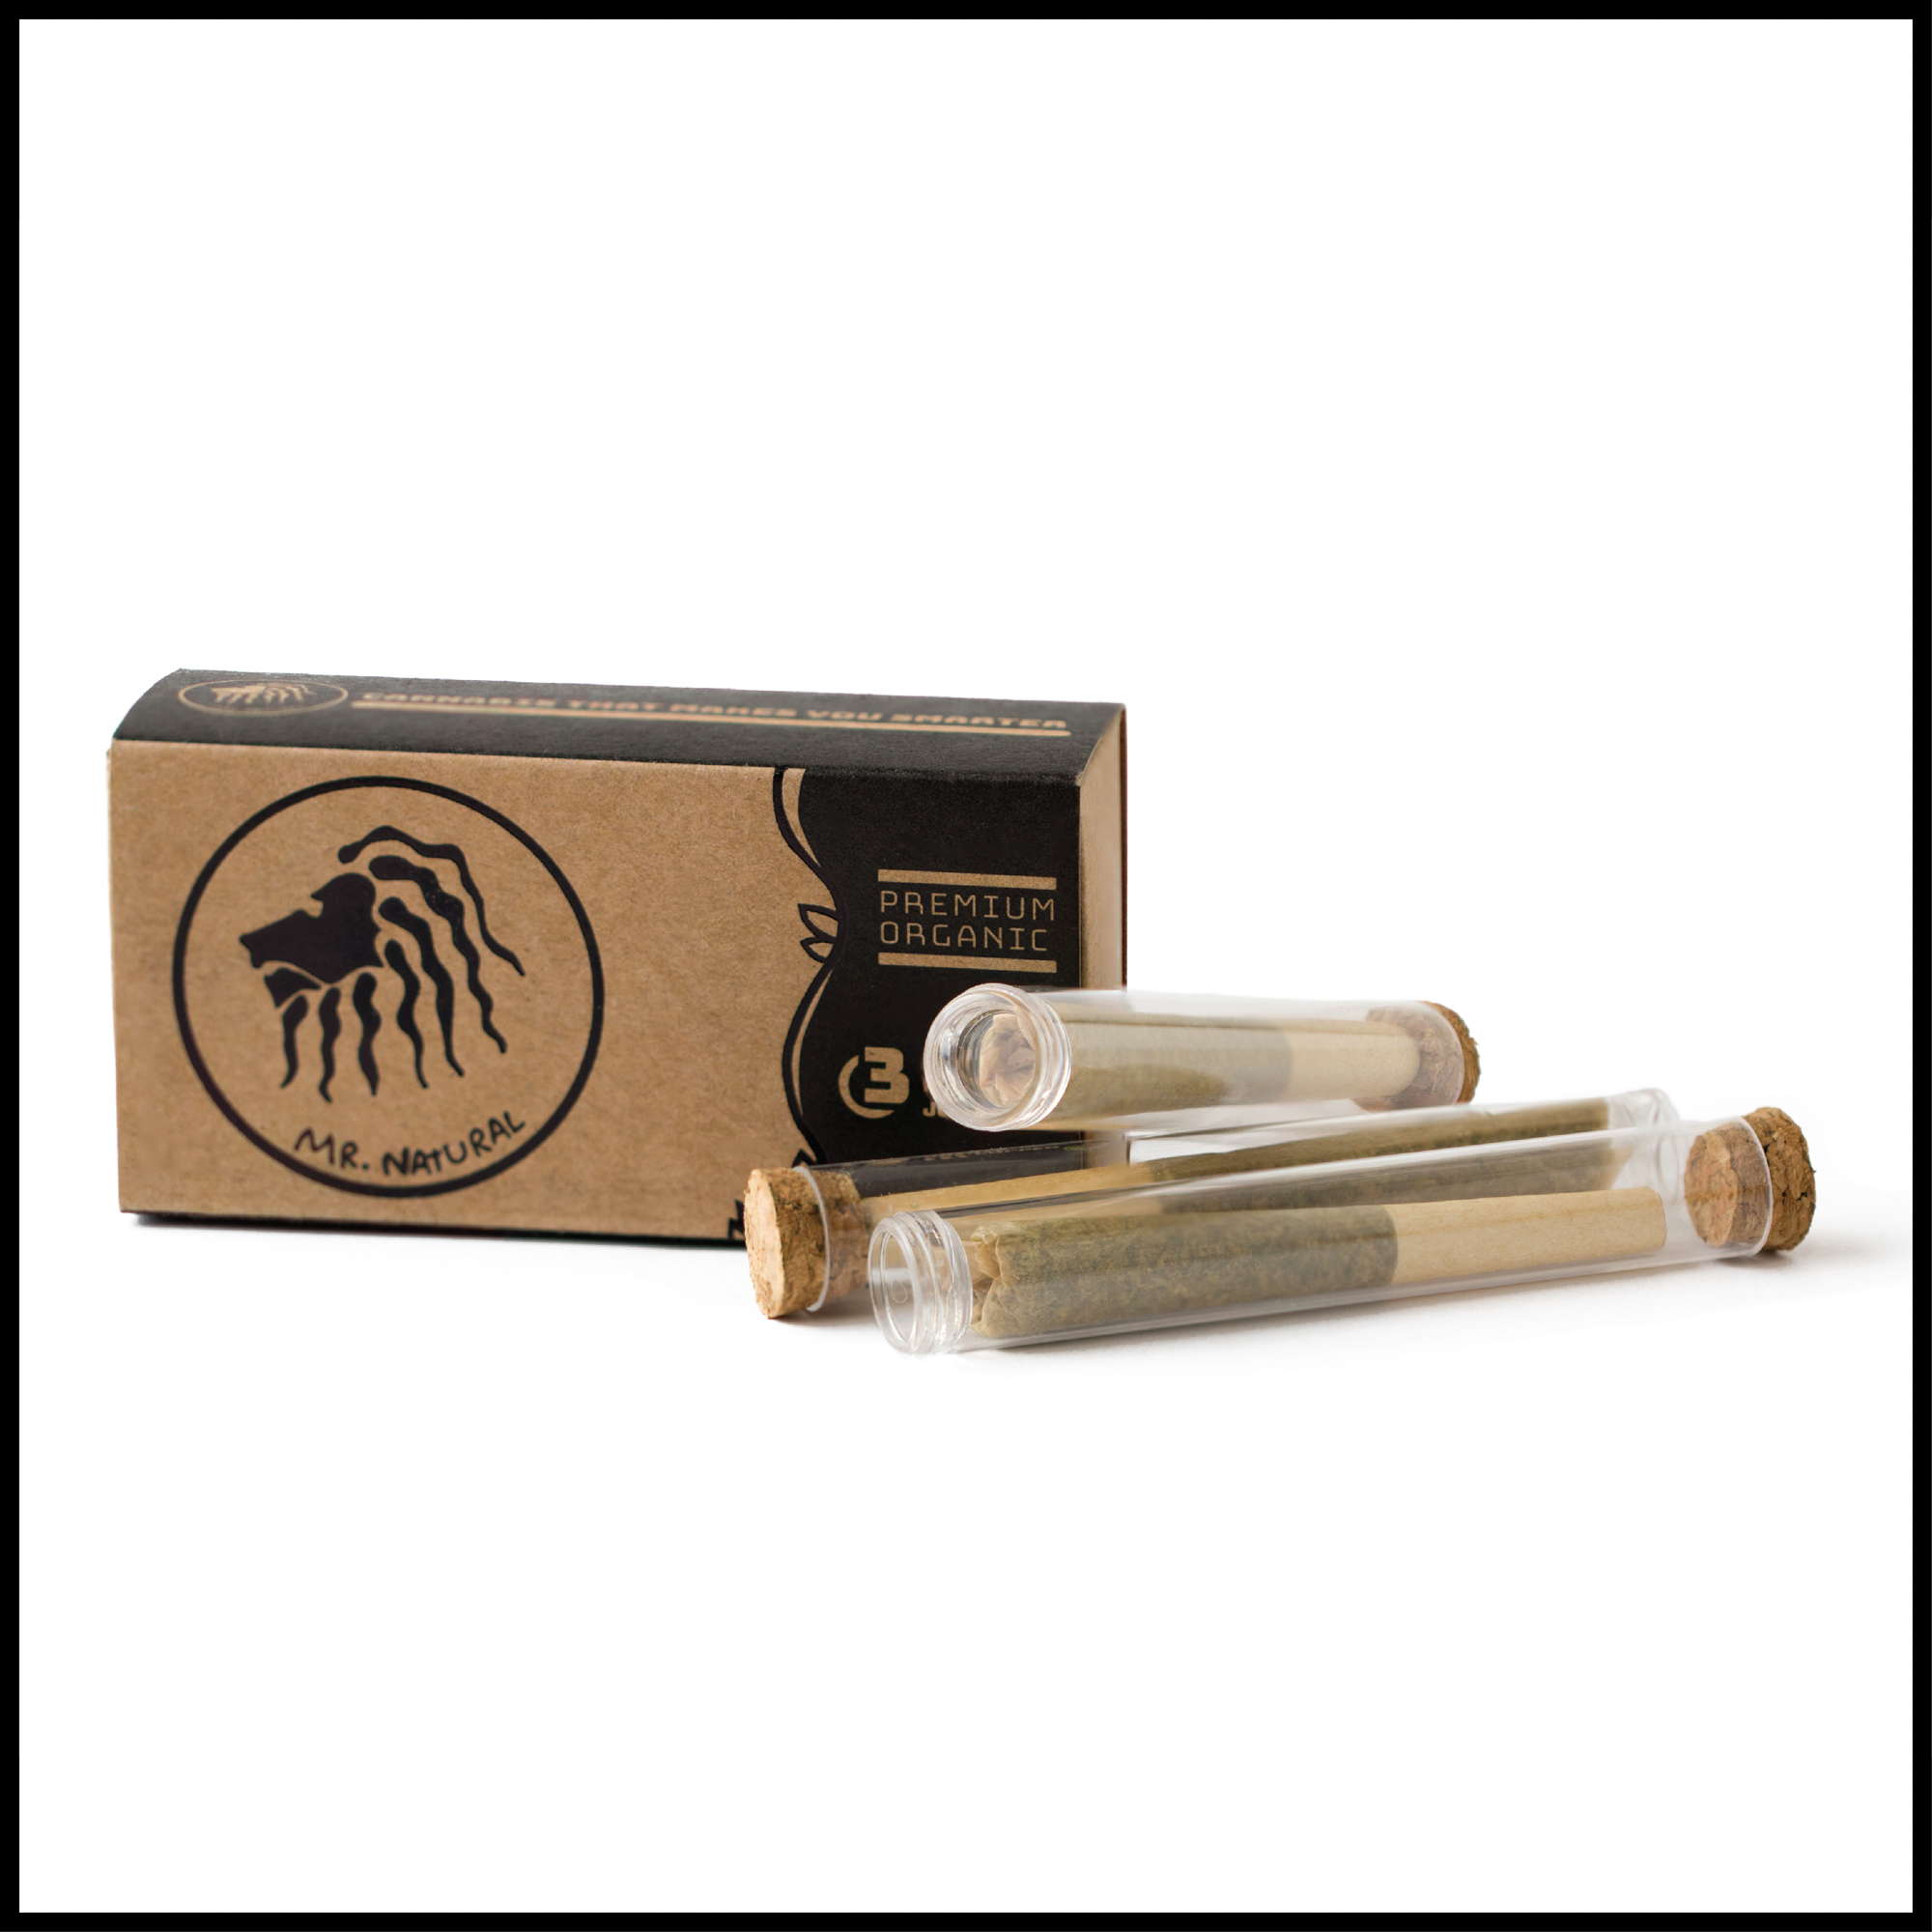 Mr Natural product - 3-pack joints - Premium organic pre-rolls